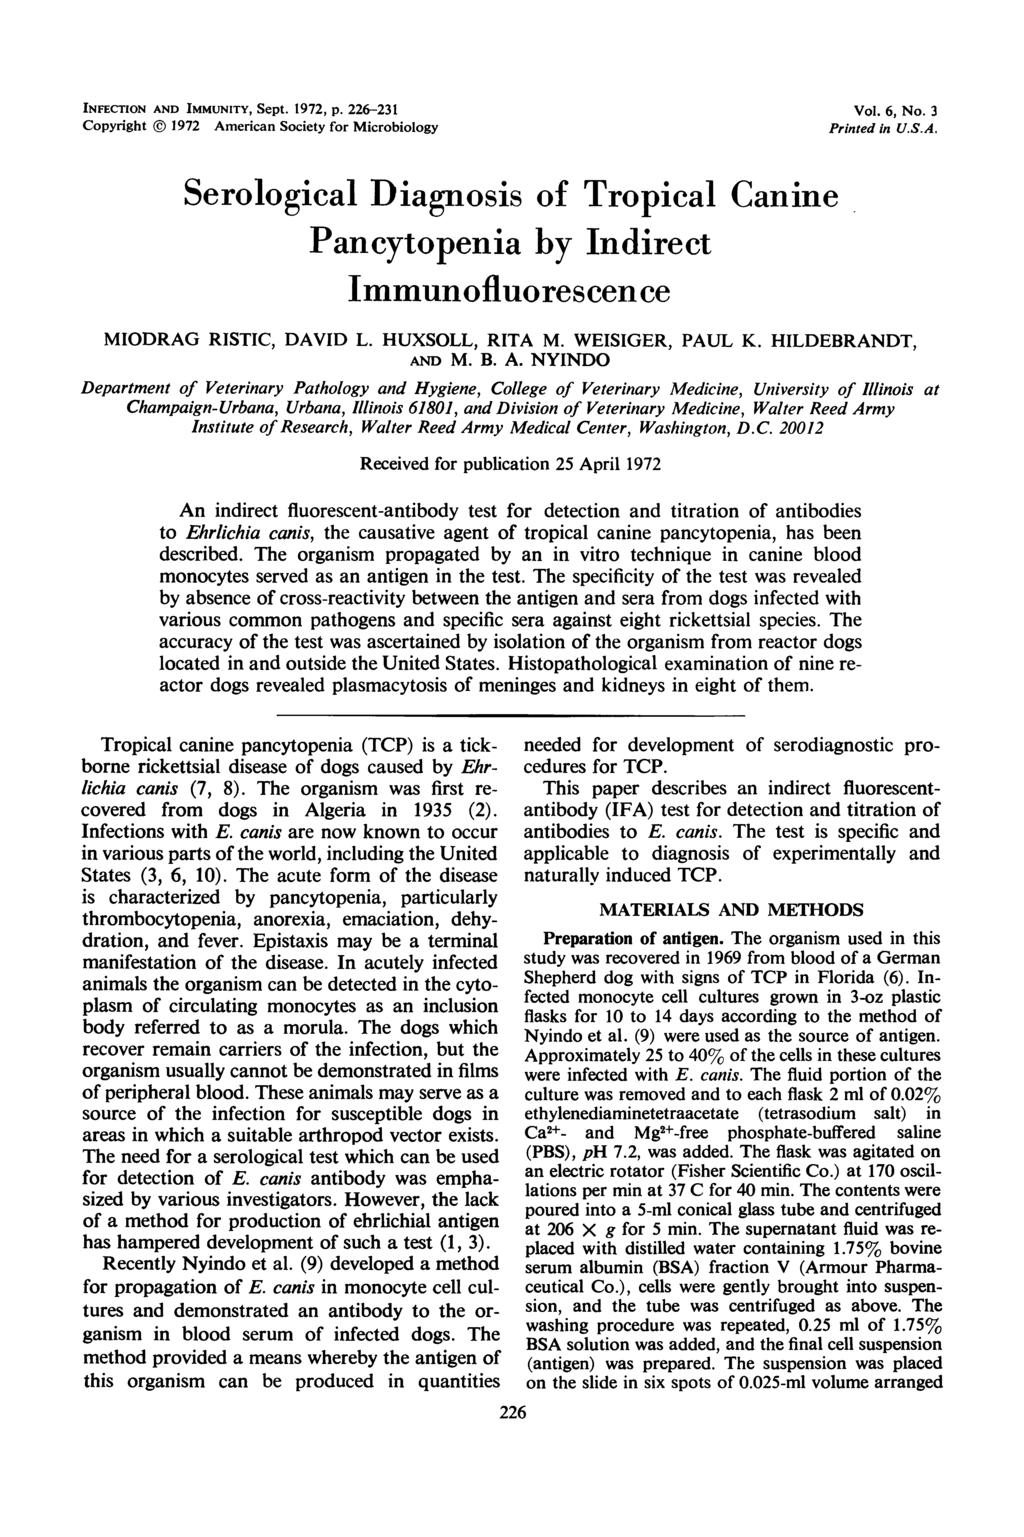 INFECTION AND IMMUNITY, Sept. 1972, p. 226-231 Copyright 1972 American Society for Microbiology Vol. 6, No. 3 Printed in U.S.A. Serological Diagnosis of Tropical Canine Pancytopenia by Indirect Immunofluorescence MIODRAG RISTIC, DAVID L.